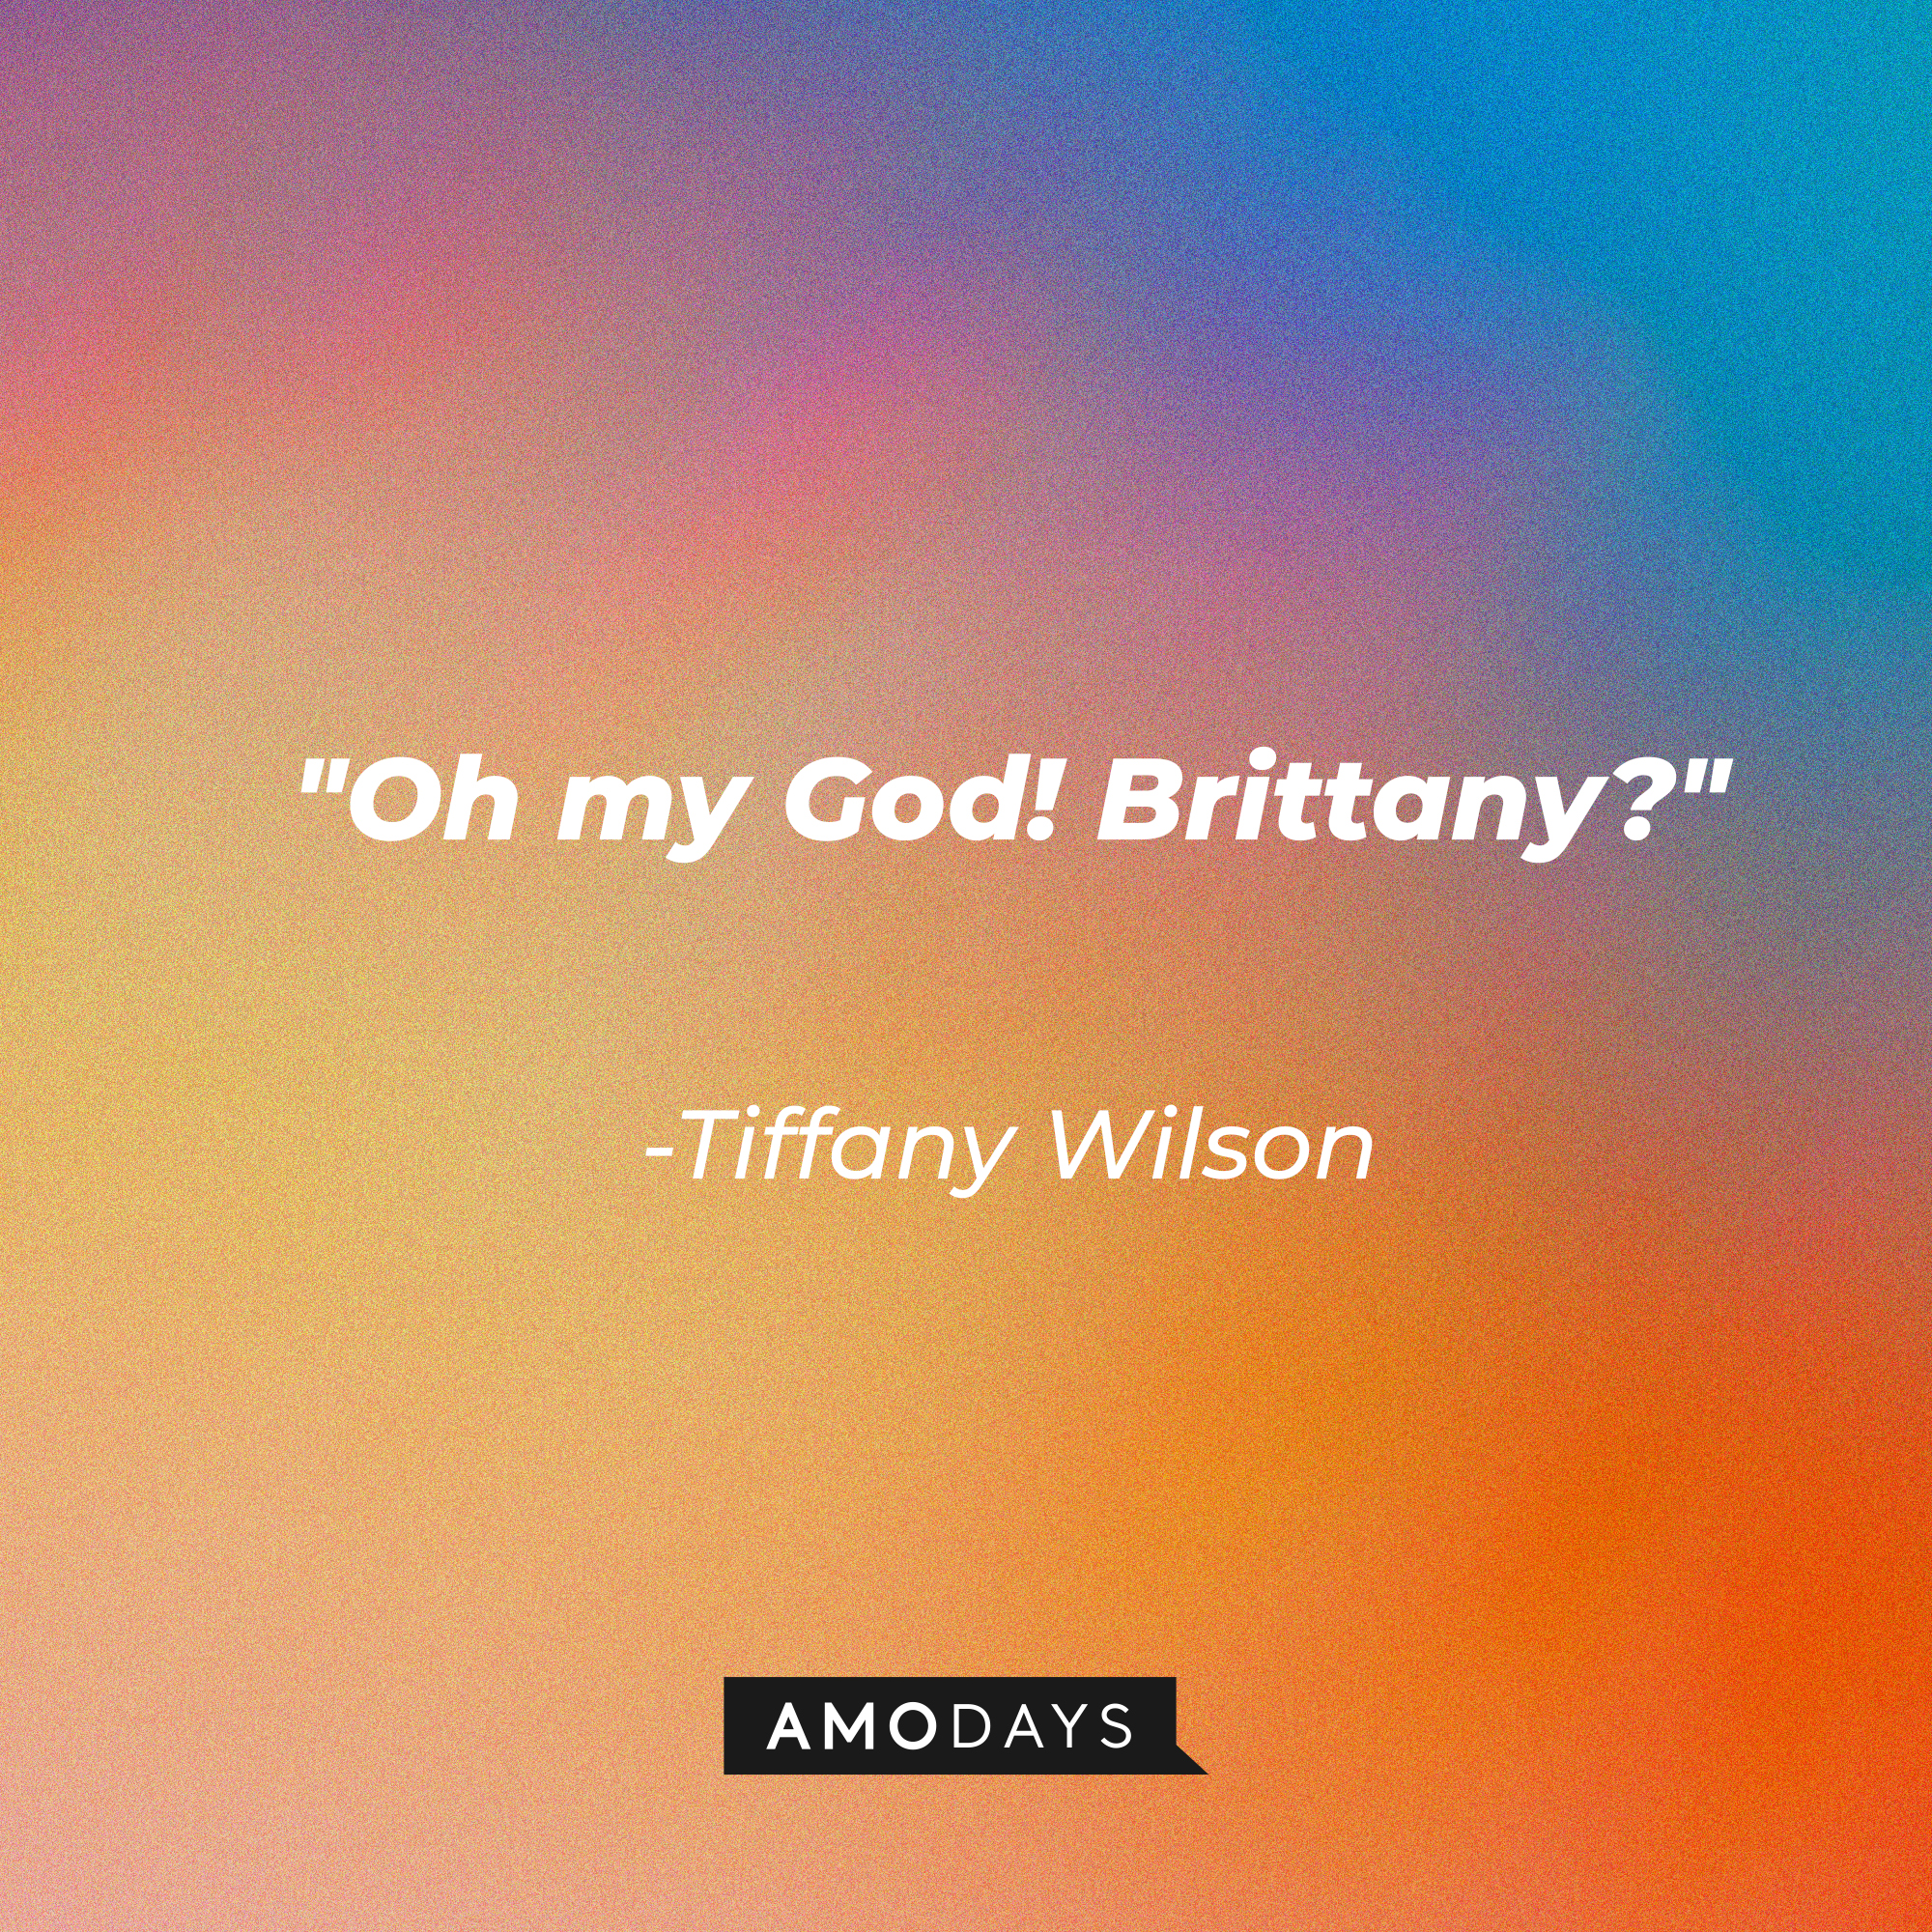 Tiffany Wilson's quote: "Oh my God! Brittany?" | Source: Amodays